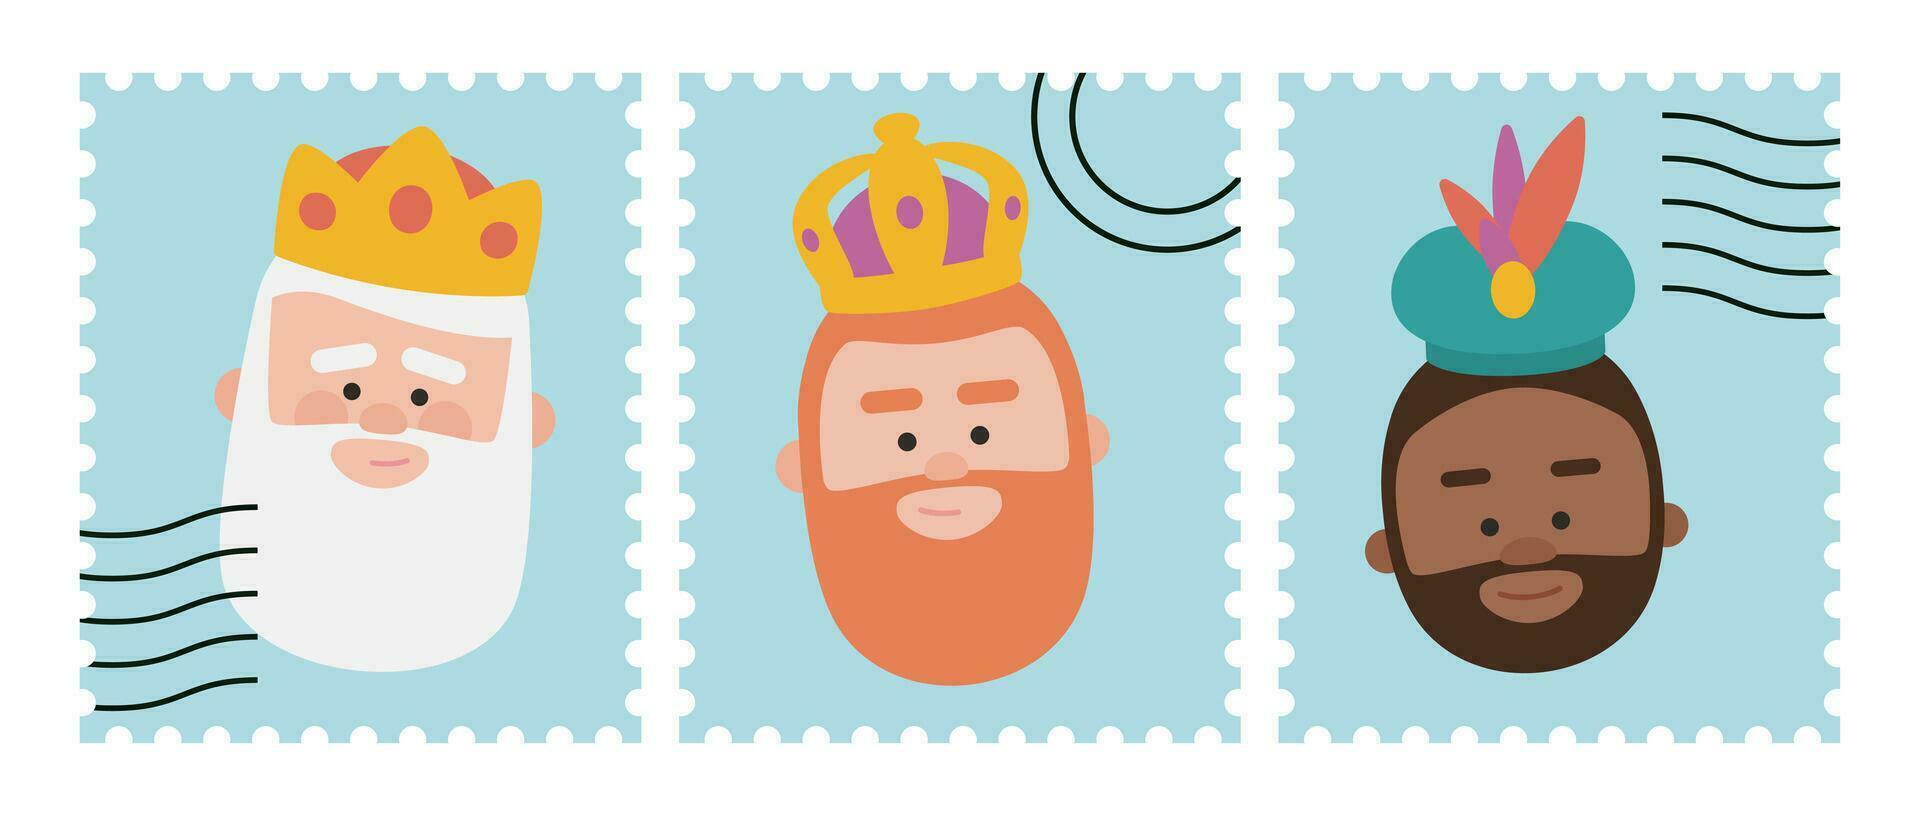 Funny Blue Stamps packs of the wise men. The three kings of orient, Melchior, Gaspard and Balthazar. vector